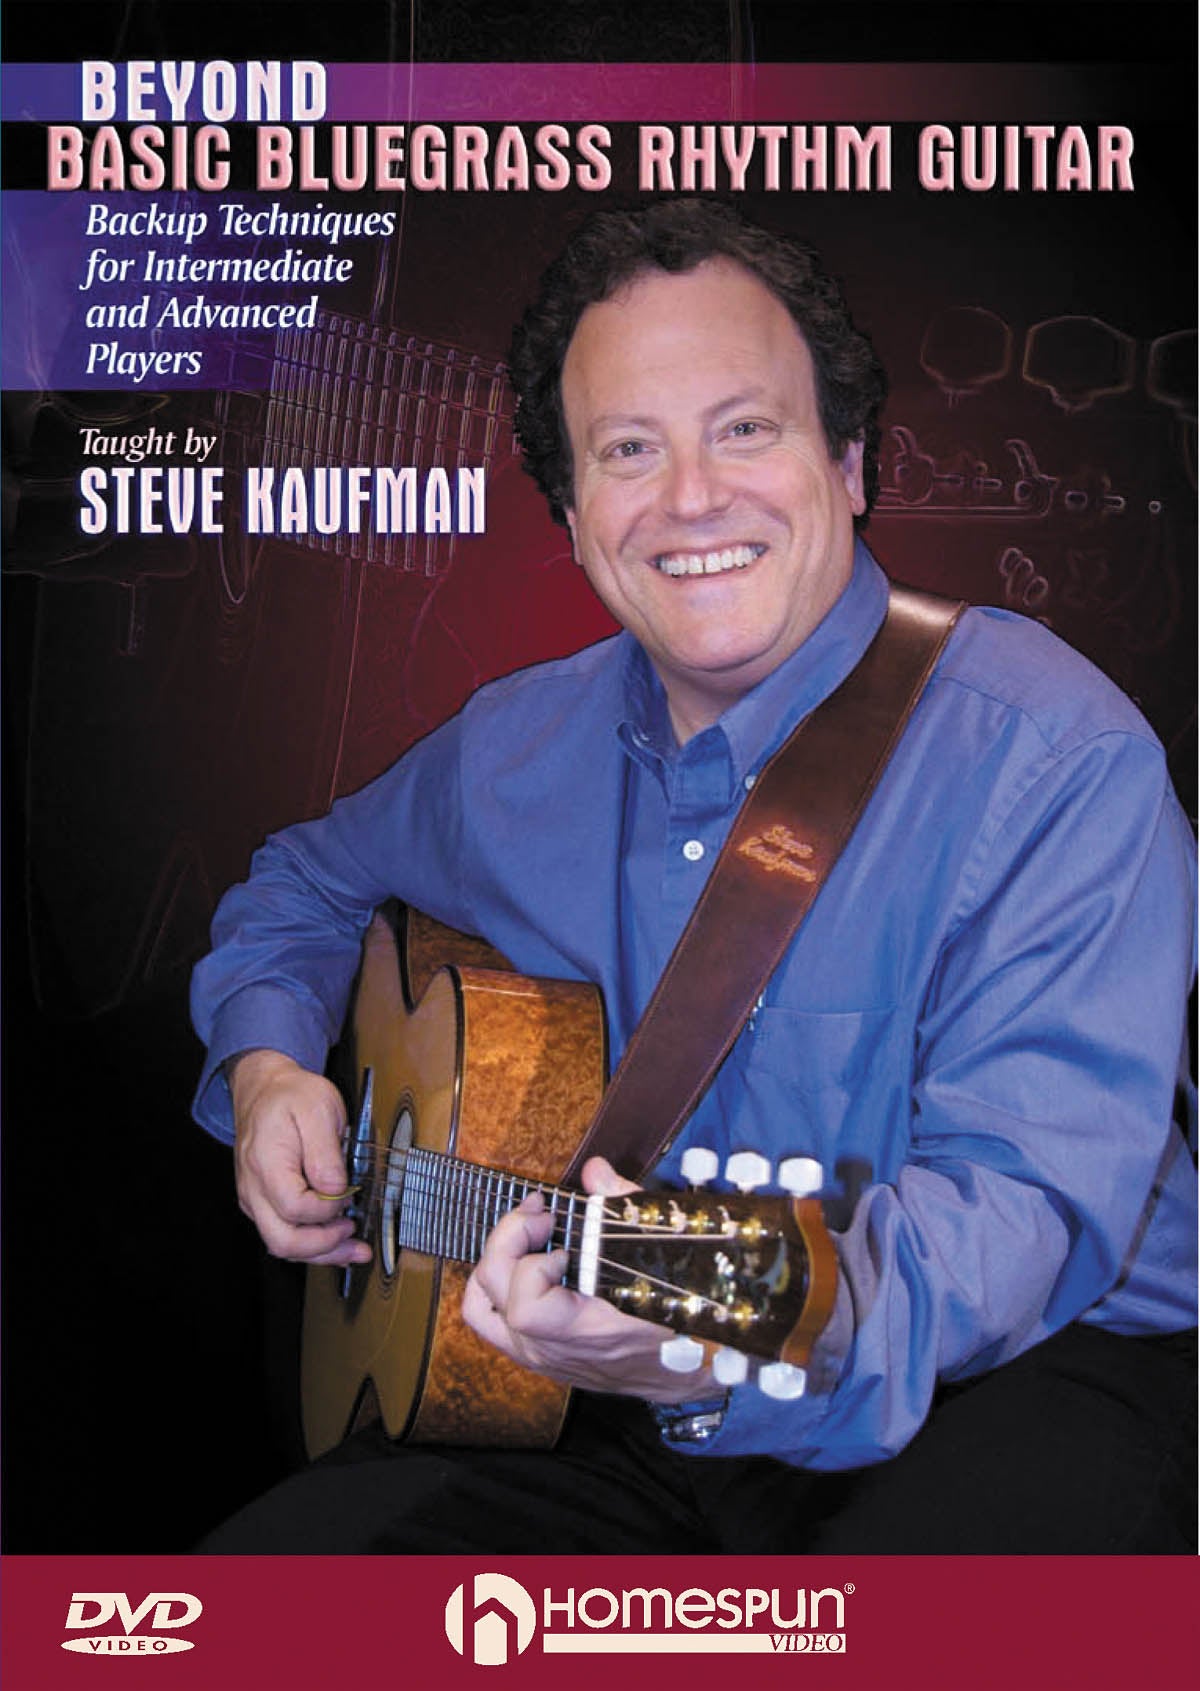 Image 1 of DVD - Beyond Basic Bluegrass Rhythm Guitar - Backup Techniques for Inter. and Advanced Players - SKU# 300-DVD366 : Product Type Media : Elderly Instruments